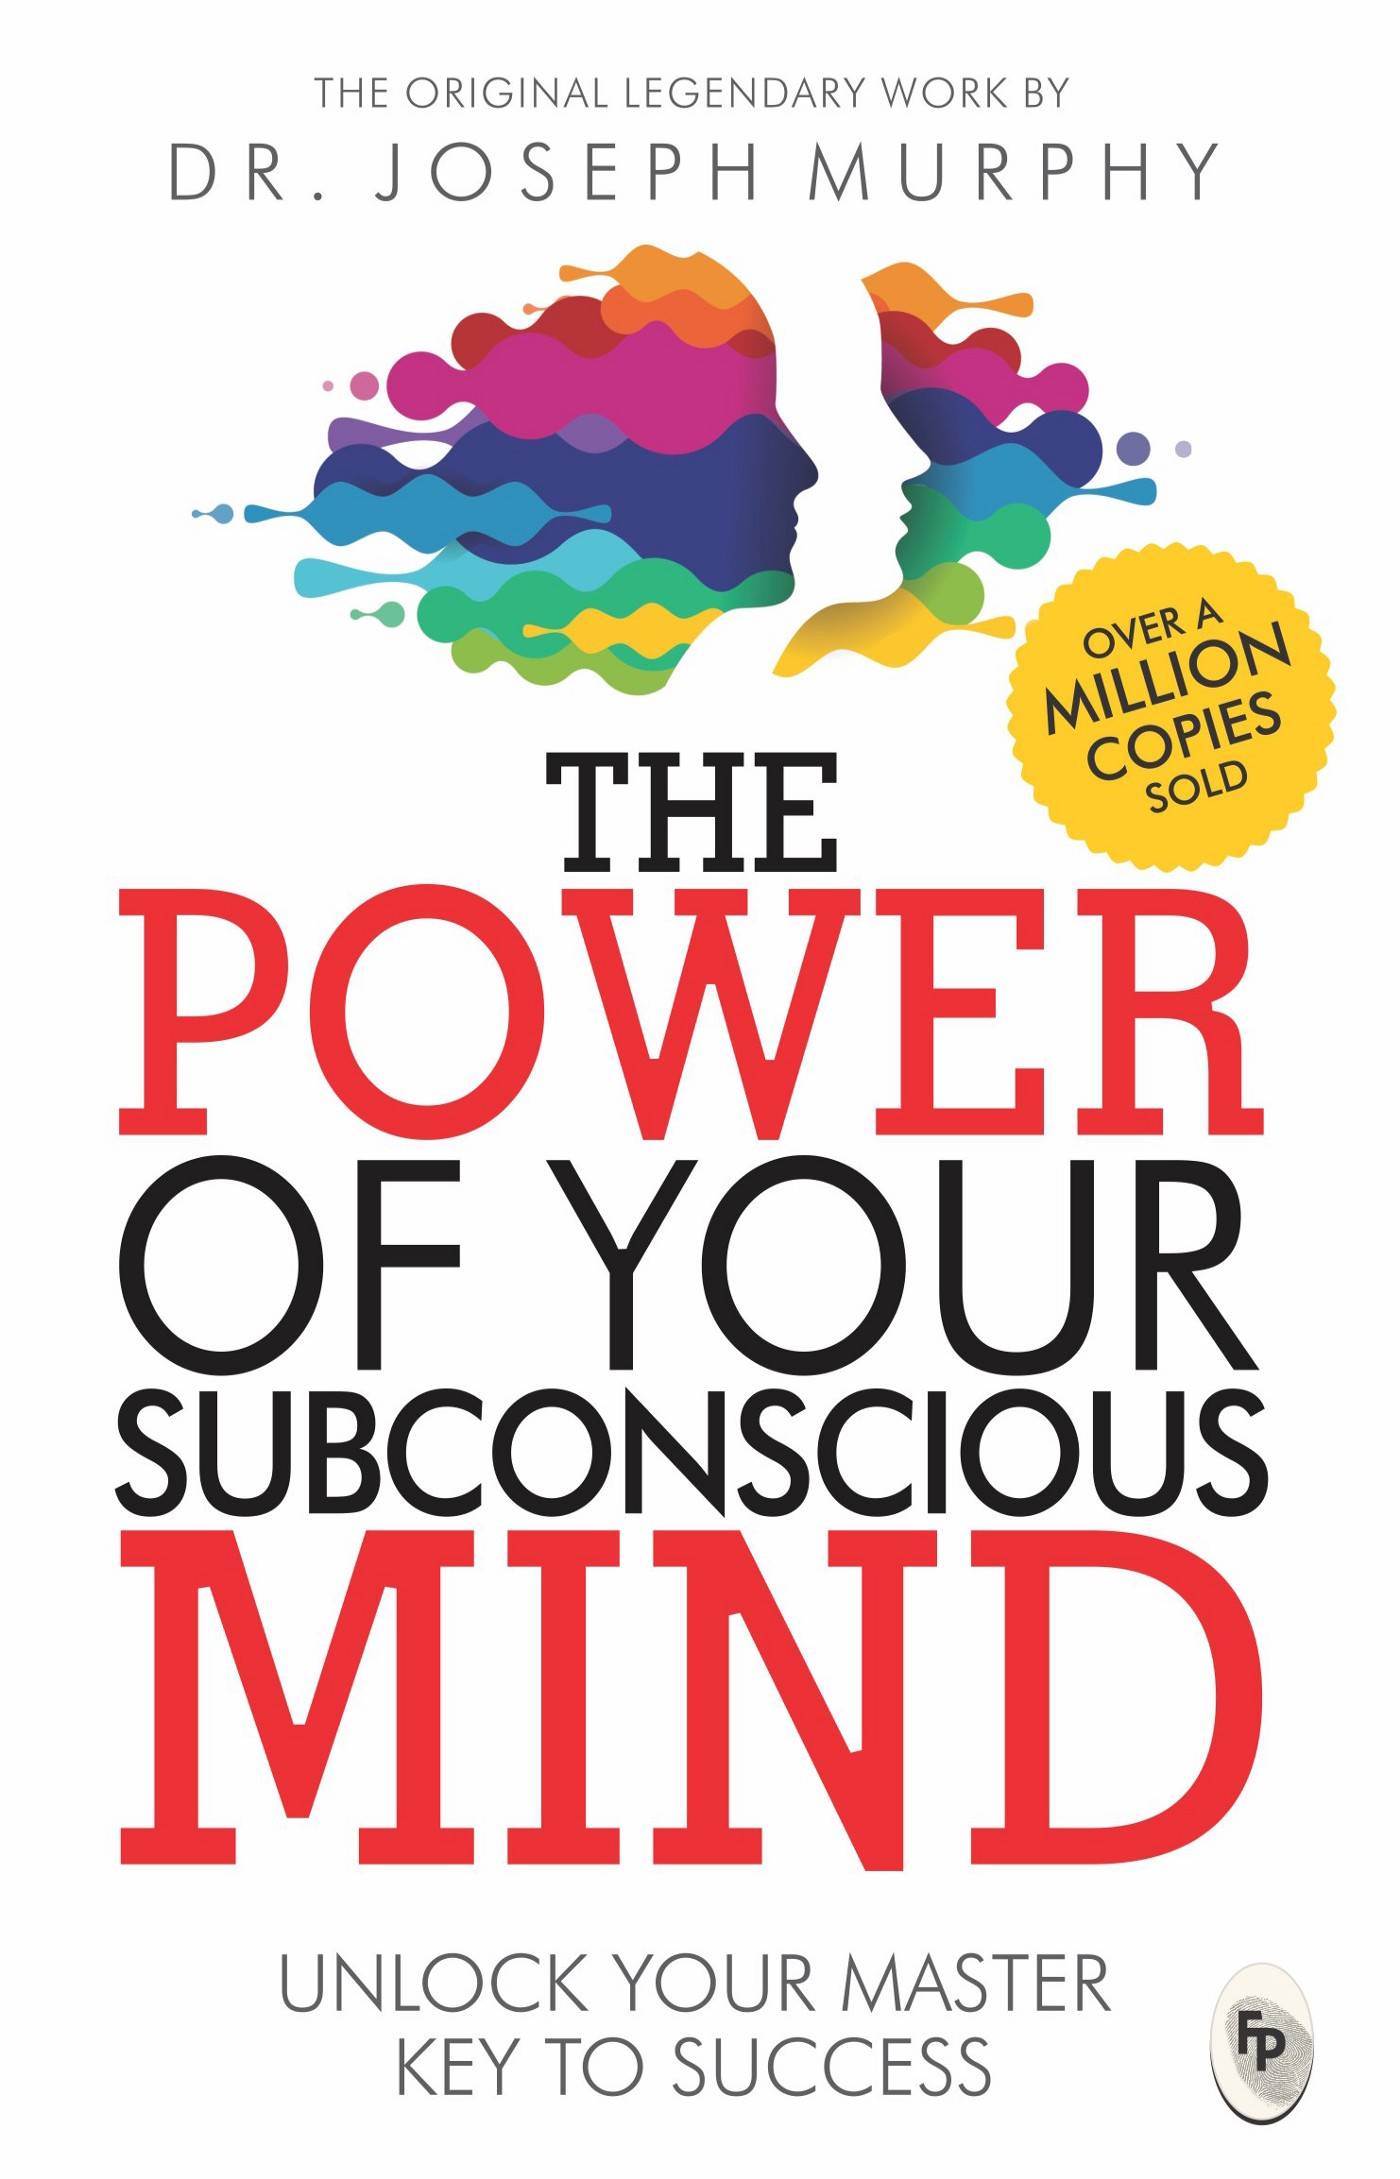 IMG : The power of your subconscious Mind